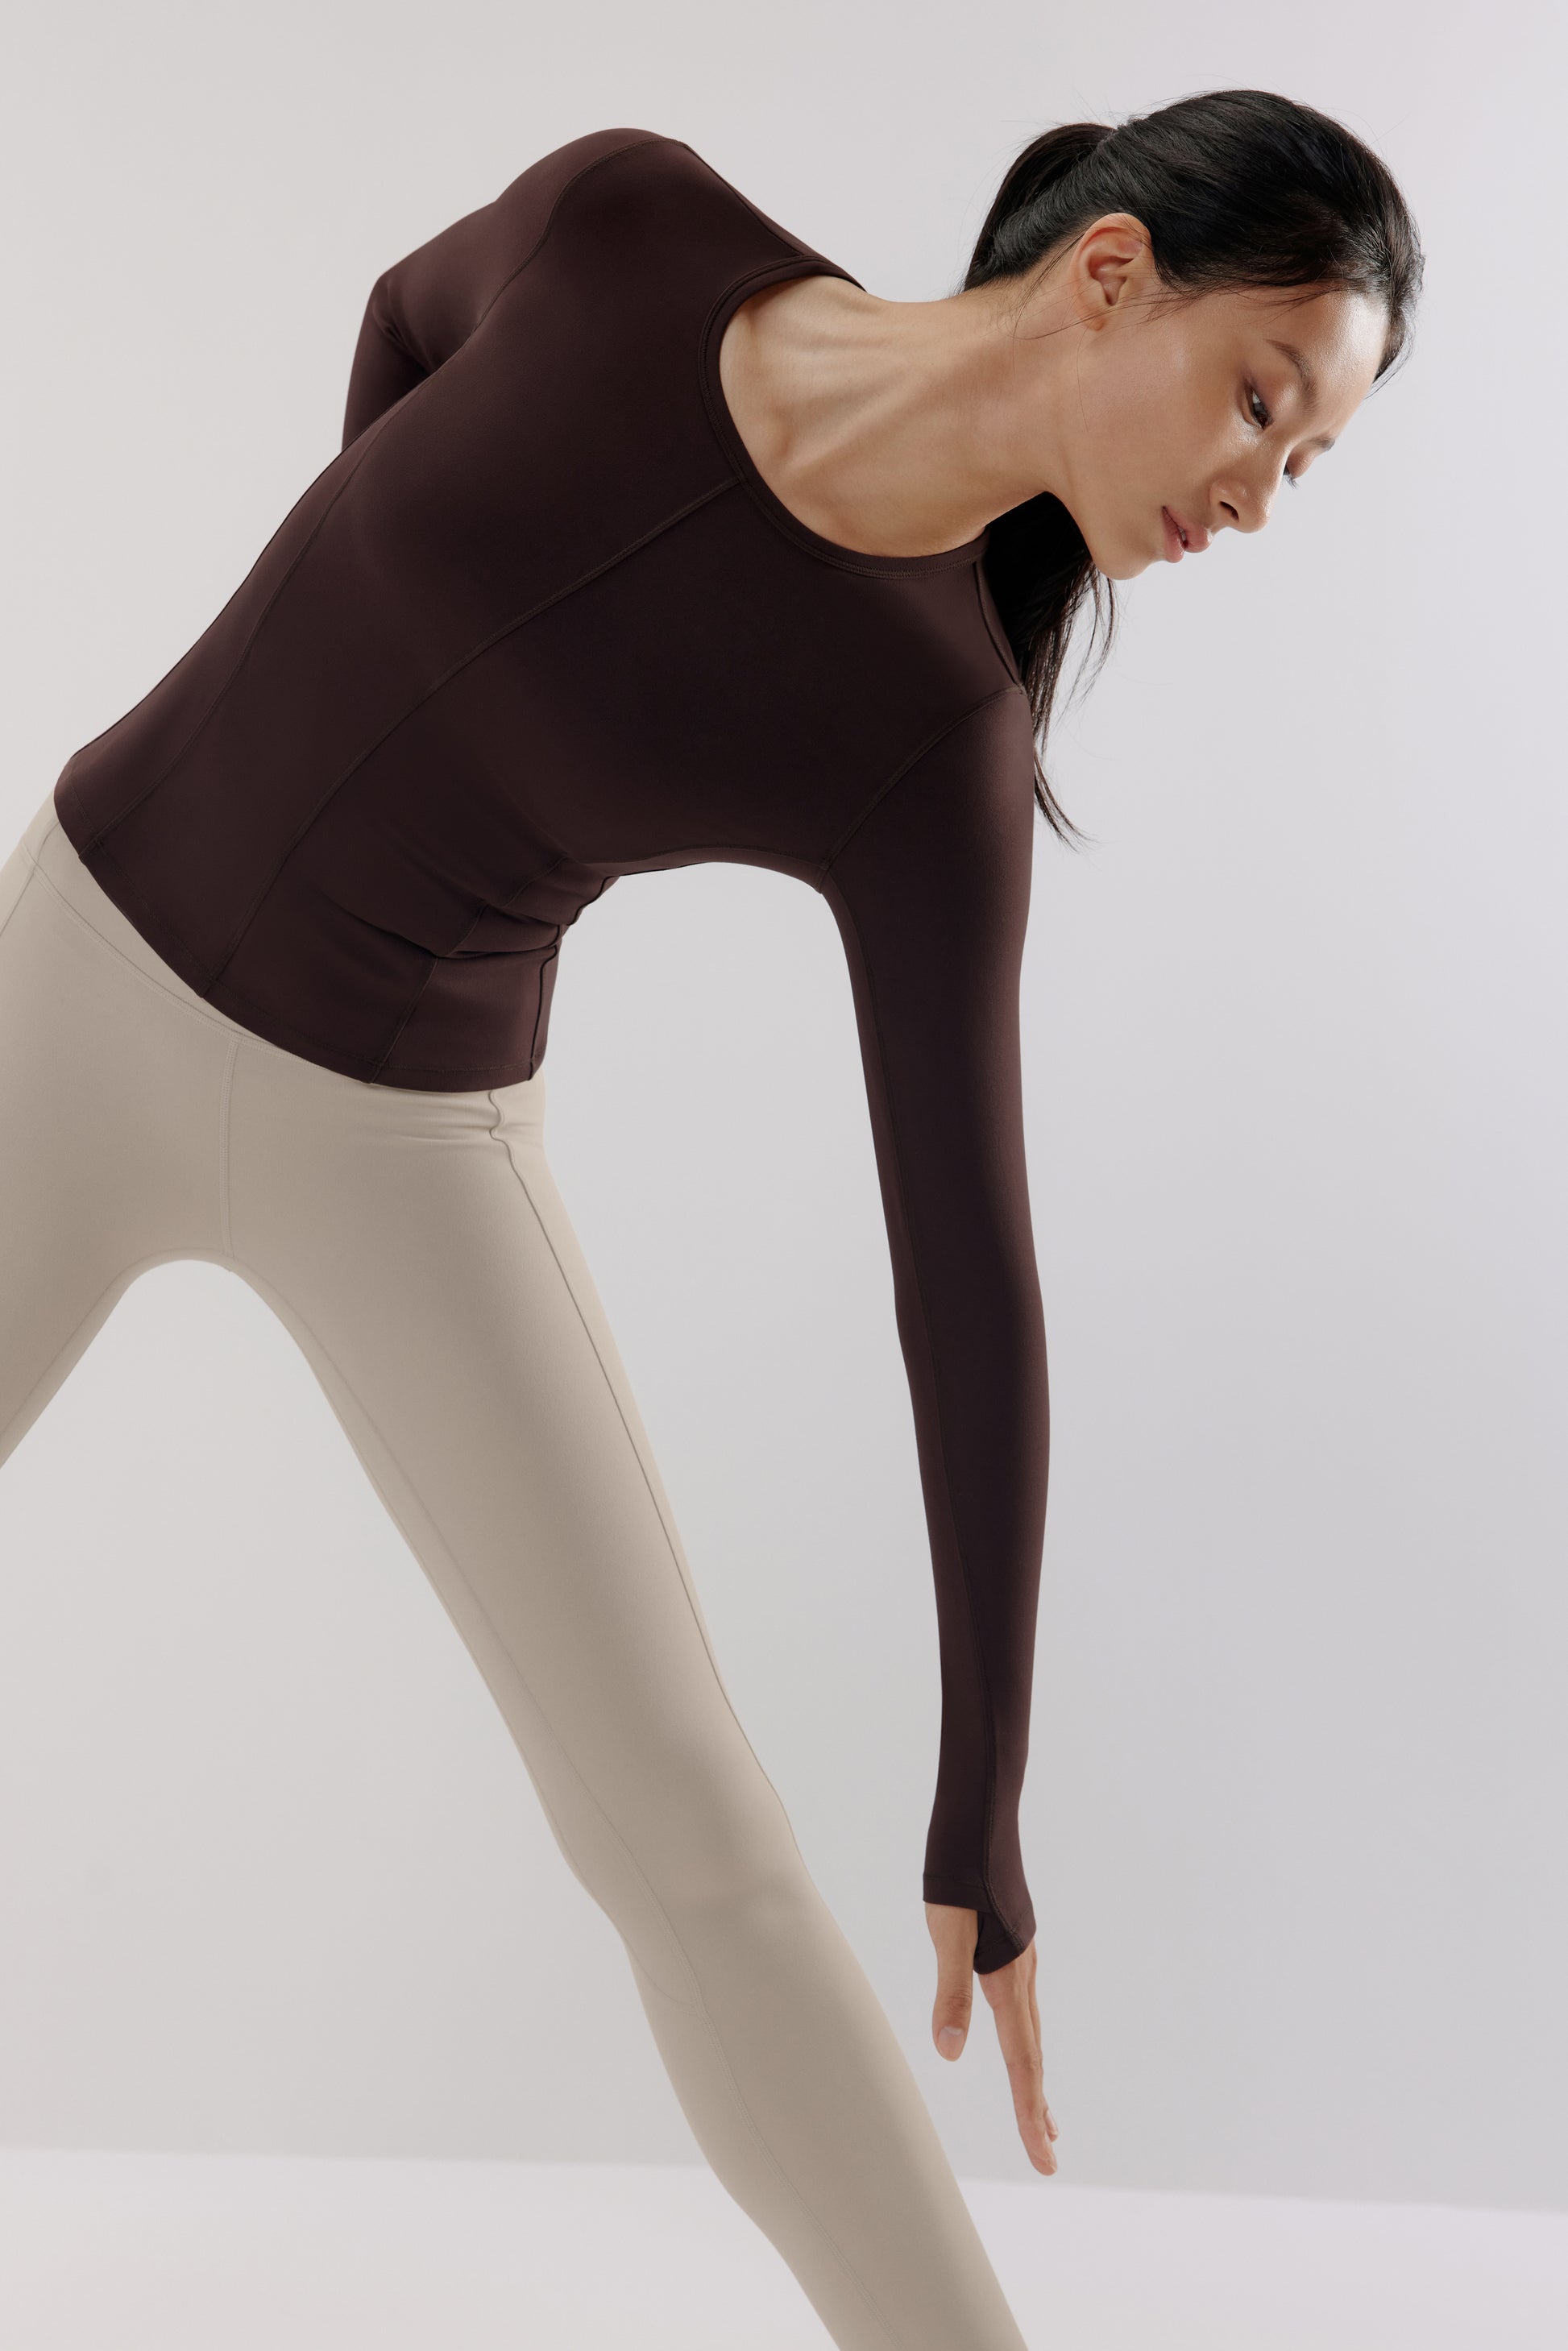 A woman wears a brown mousse long sleeve sports top and grey leggings and doing Yoga.